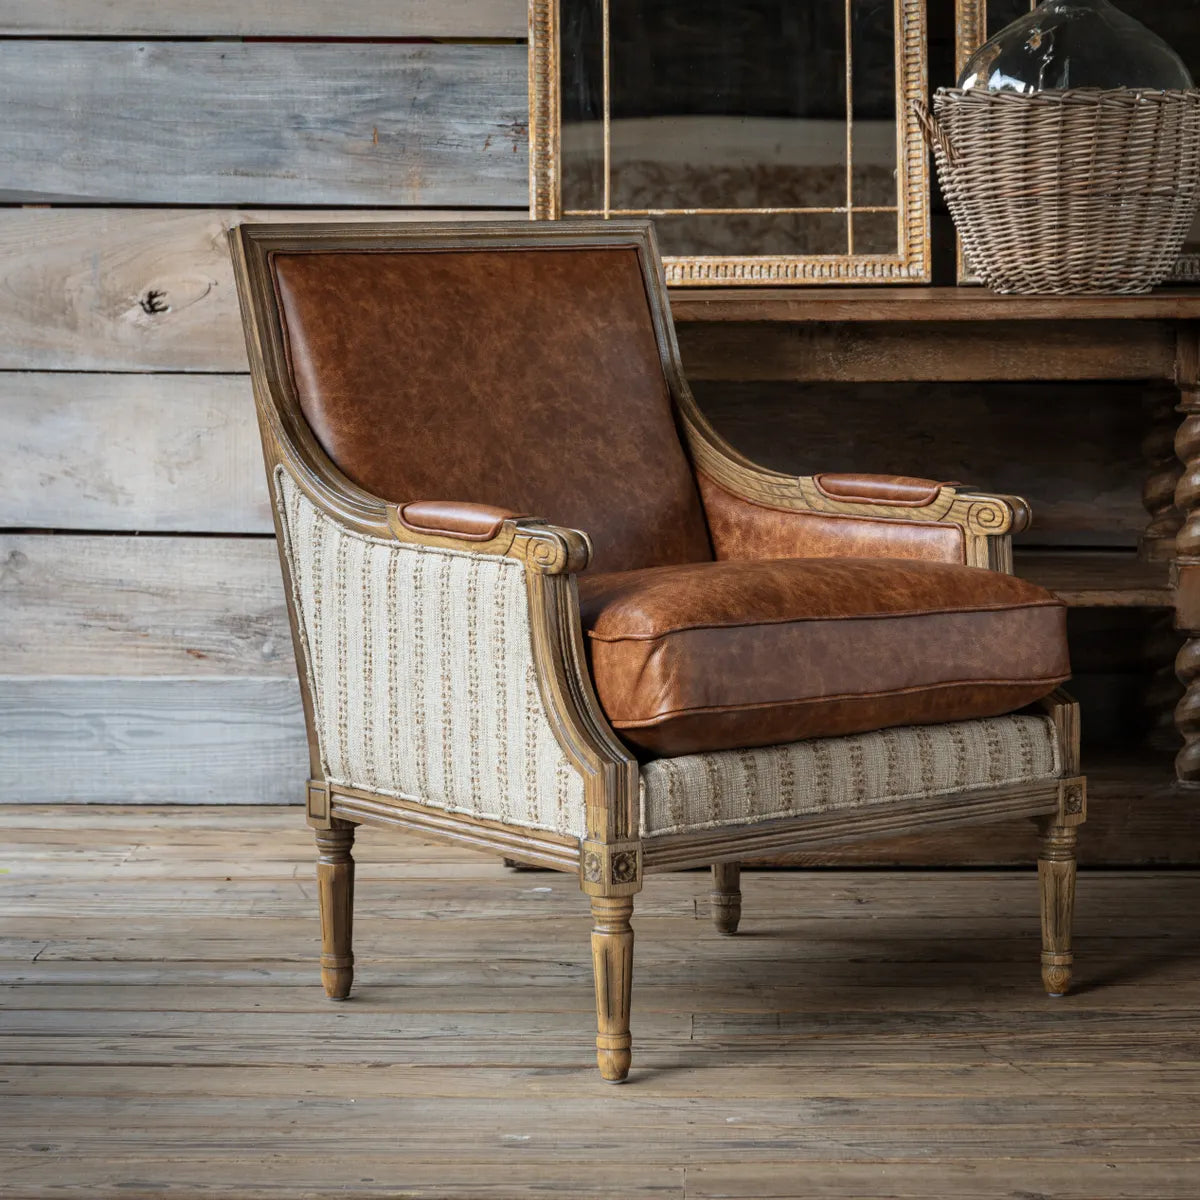 DISTRESSED LEATHER ACCENT CHAIRS FOR SALE, VINTAGE DISTRESSED LEATHER SIDE CHAIRS